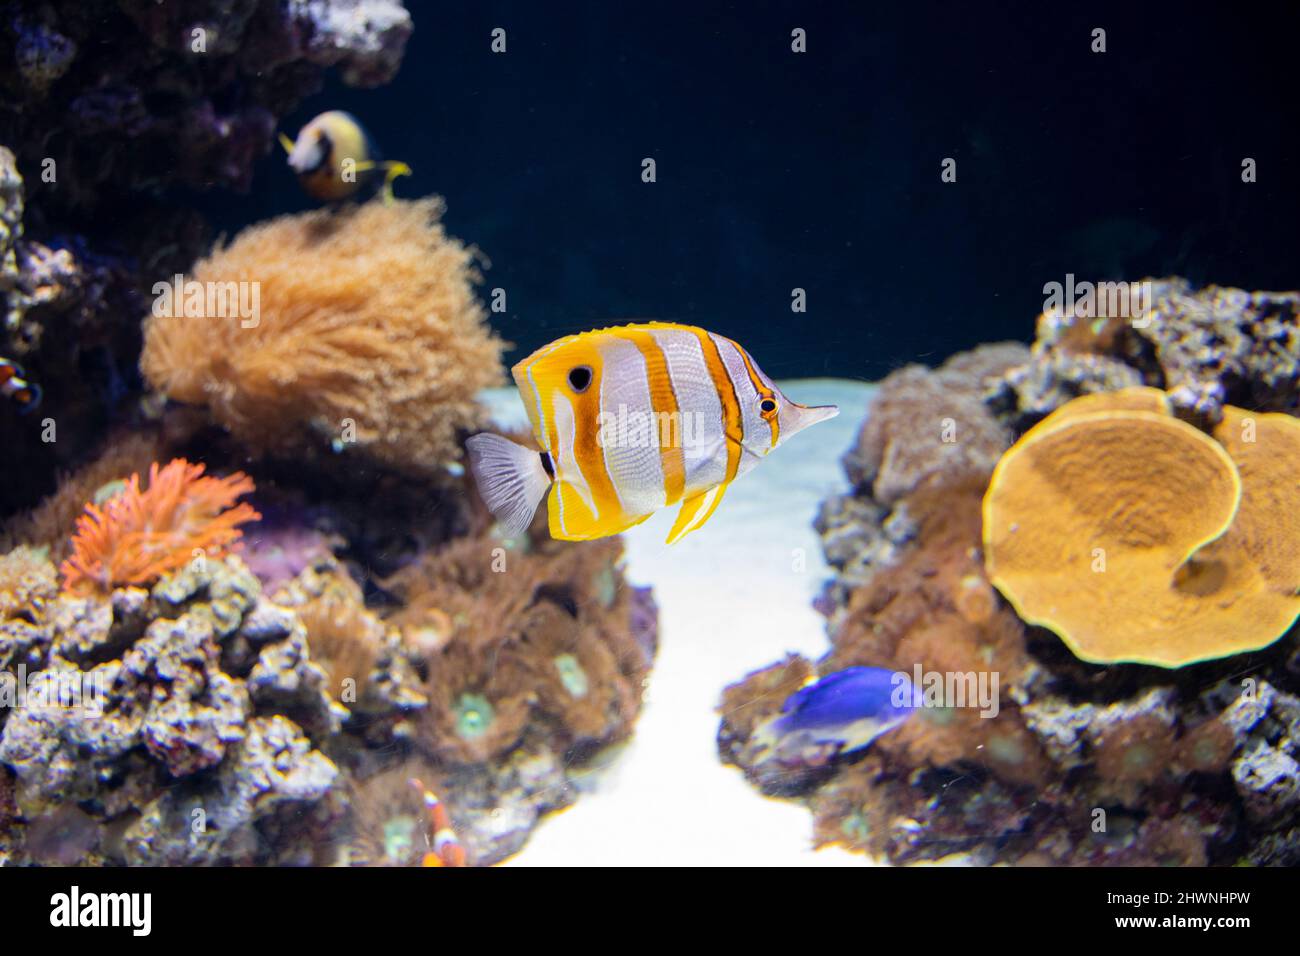 The copperband butterflyfish, also known as the beaked coral fish. Stock Photo